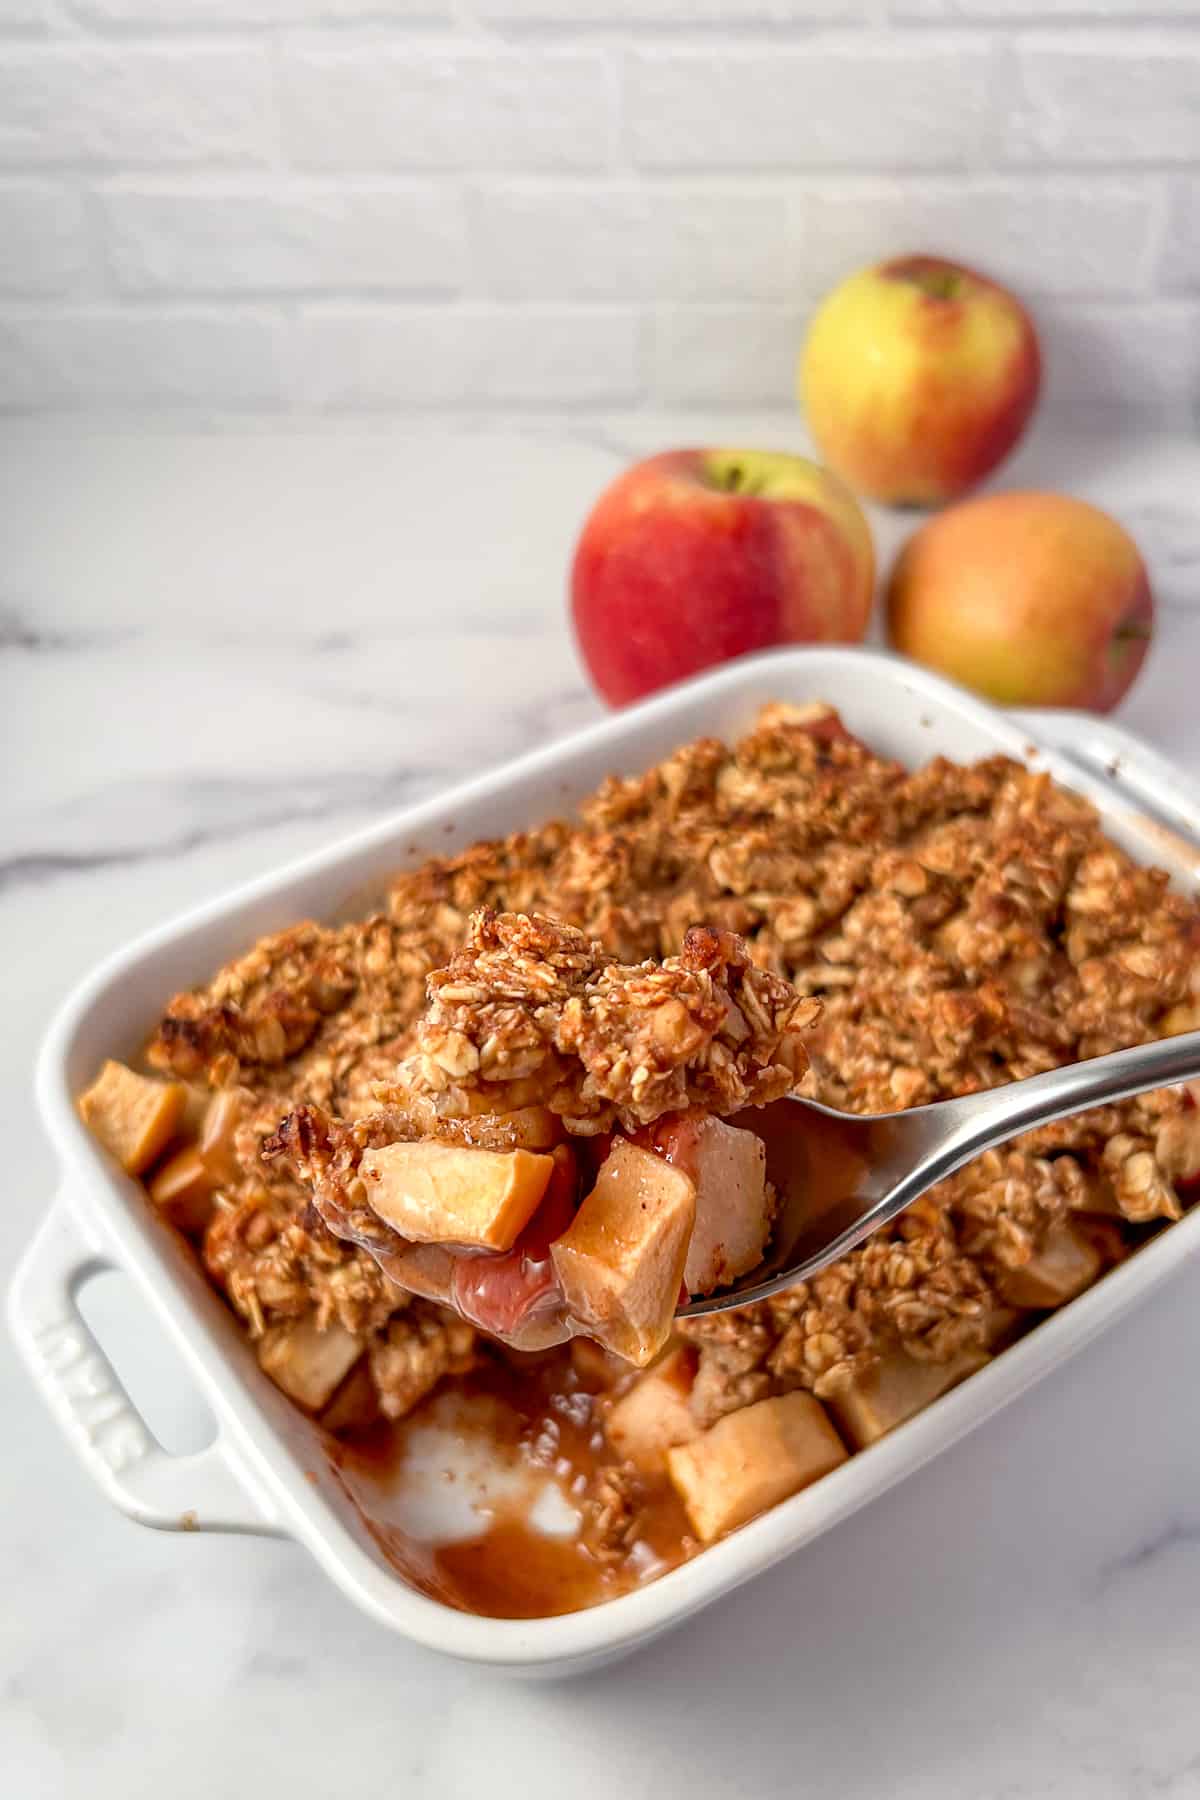 top side view of a vegan apple crisp in a casserole dish with spoon lifting some out; apples blurred in the background